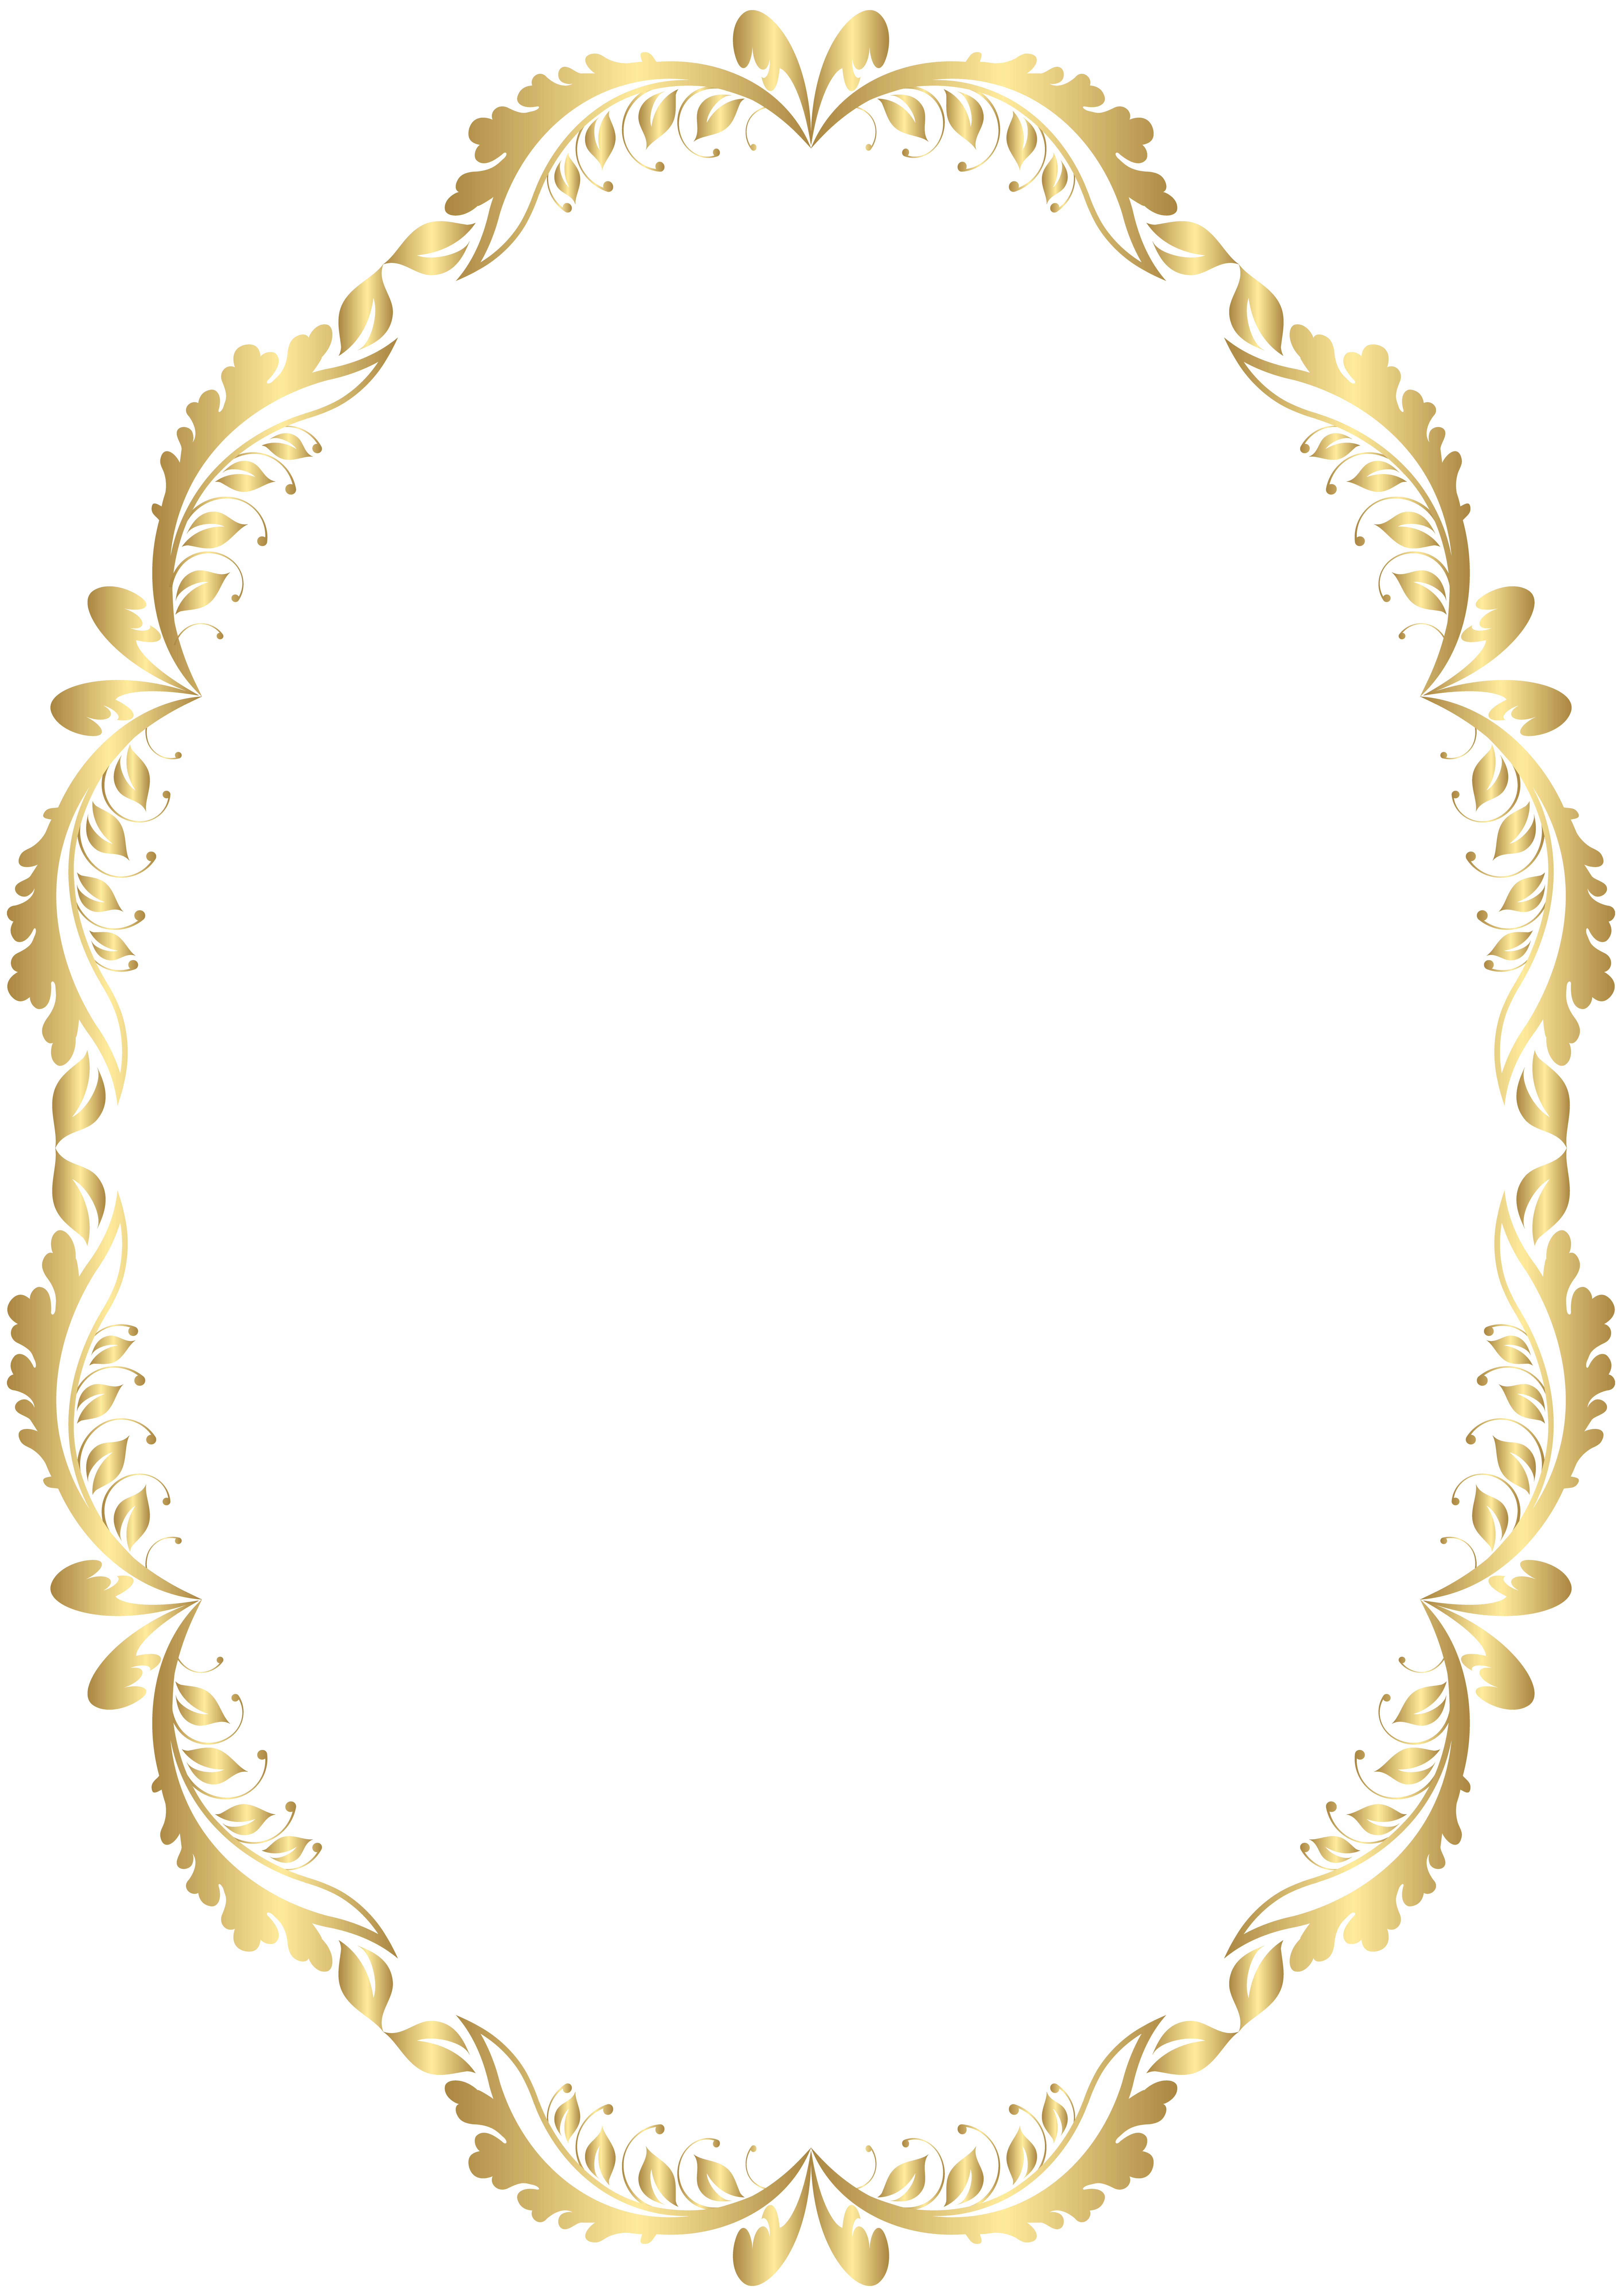 Golden oval border transparent. Garland clipart jewelry